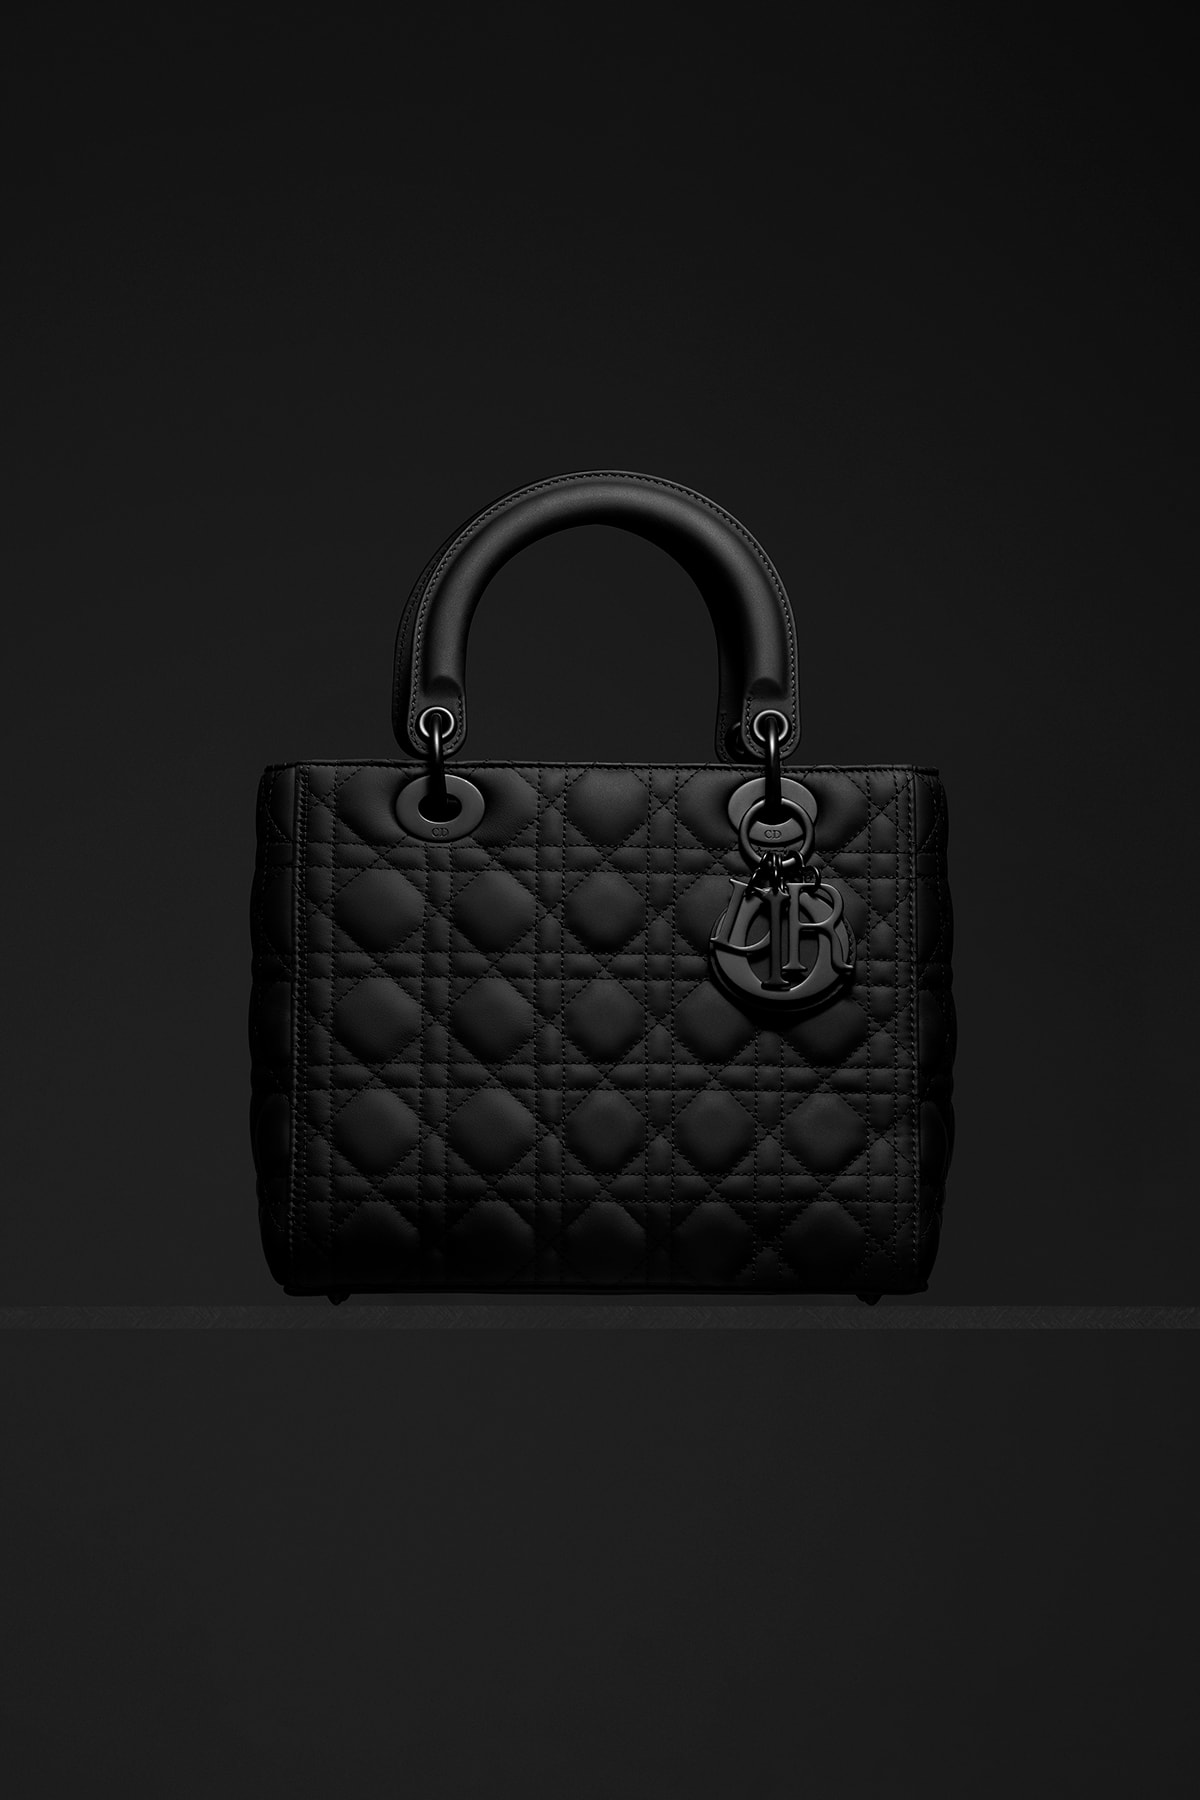 Dior Ultra-Matte Collection Bags Lady Dior Black